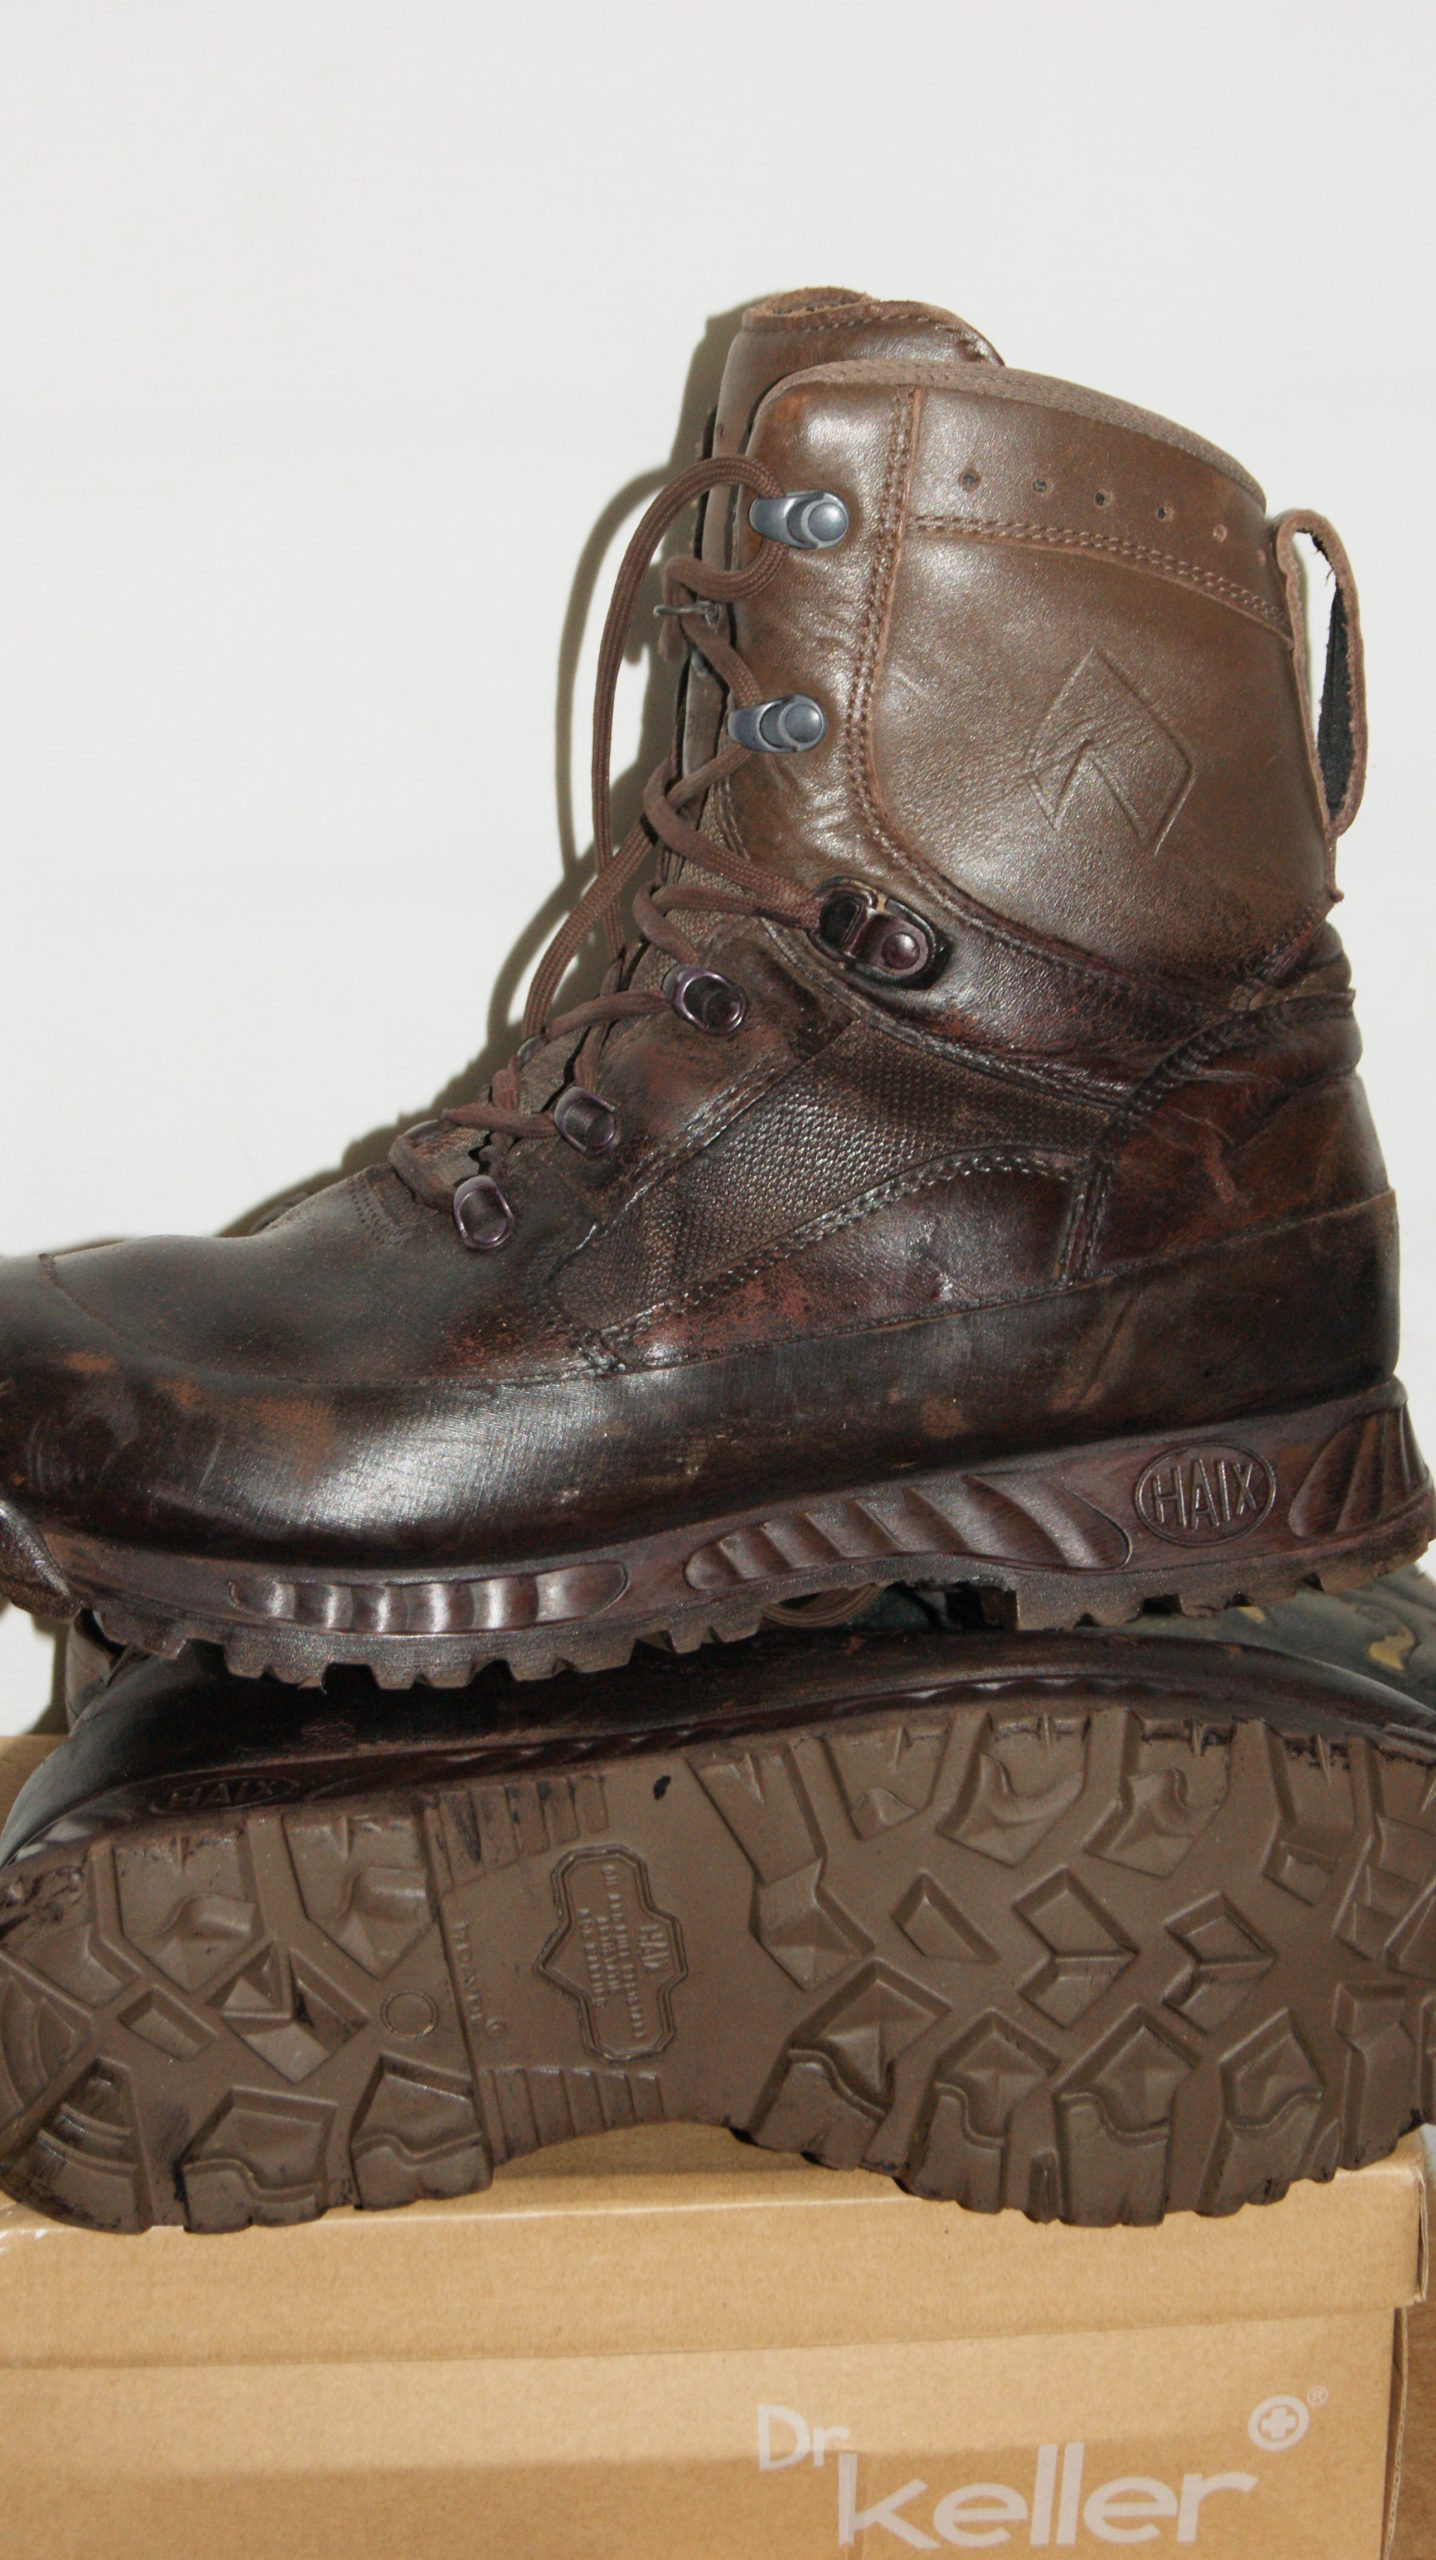 *NEW* Haix MTP Army Issue Hiking Brown Leather Waterproof GoreTex Boots 11M UK